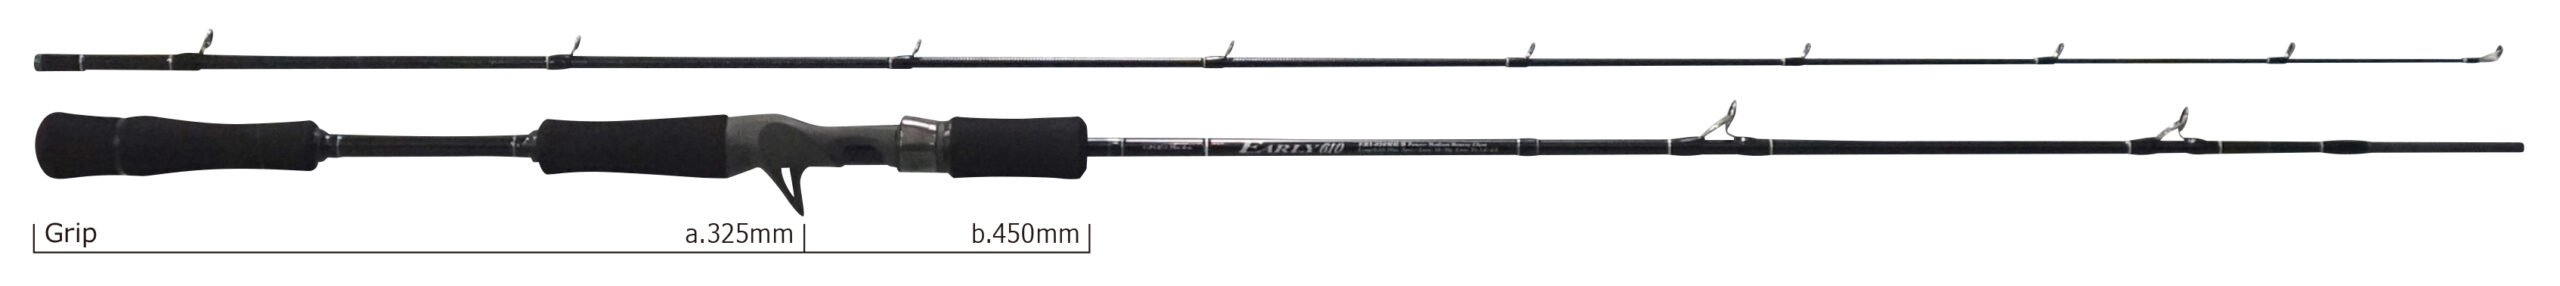 EARLY 610MH/Bait for Boat | YAMAGA Blanks